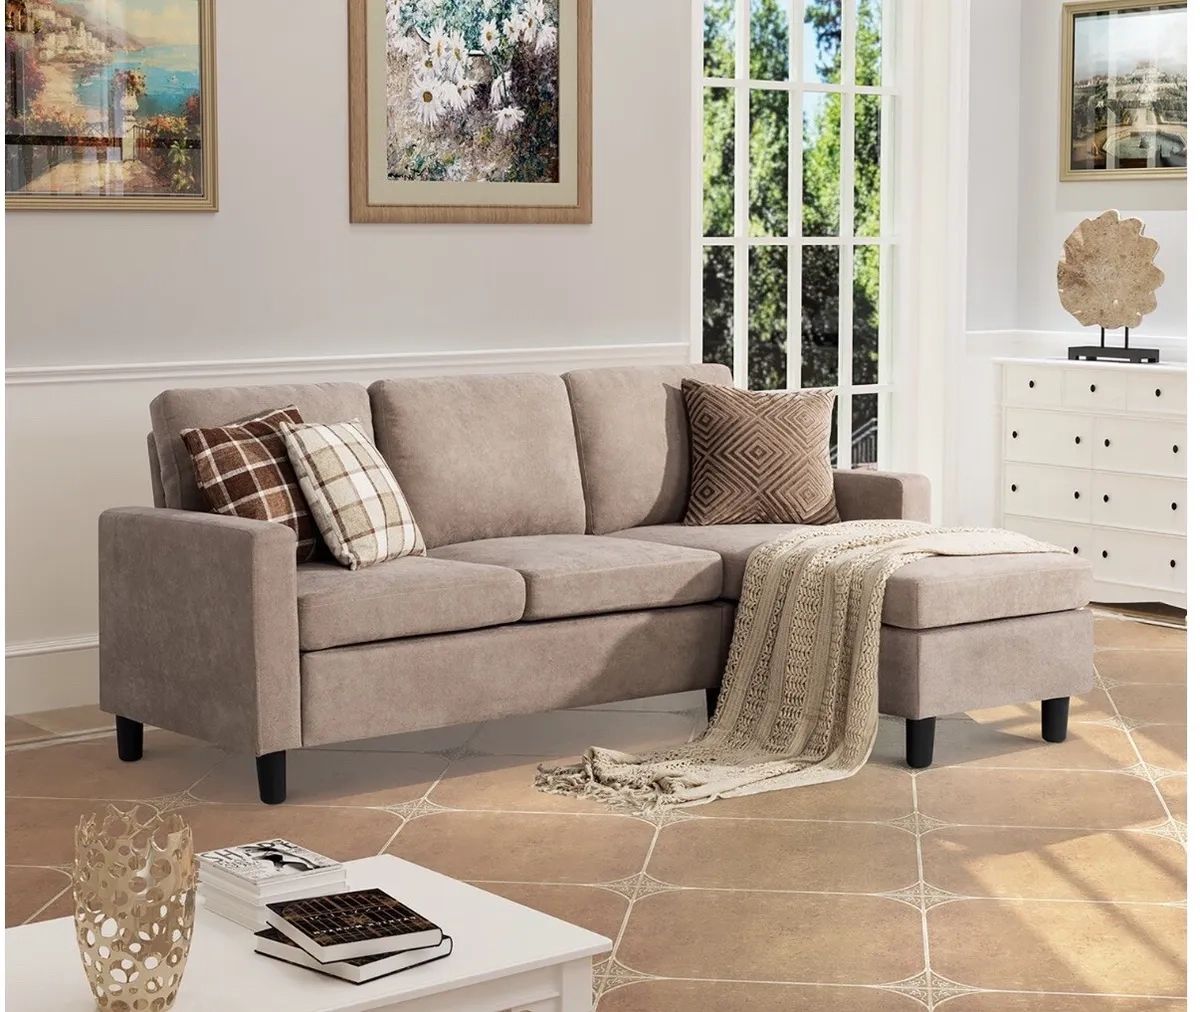 Modern L Shaped Section￼al Sofa With Linen Fabric(dark Beige) (khaki Color)  | Ebay Intended For Small L Shaped Sectional Sofas In Beige (Photo 6 of 15)